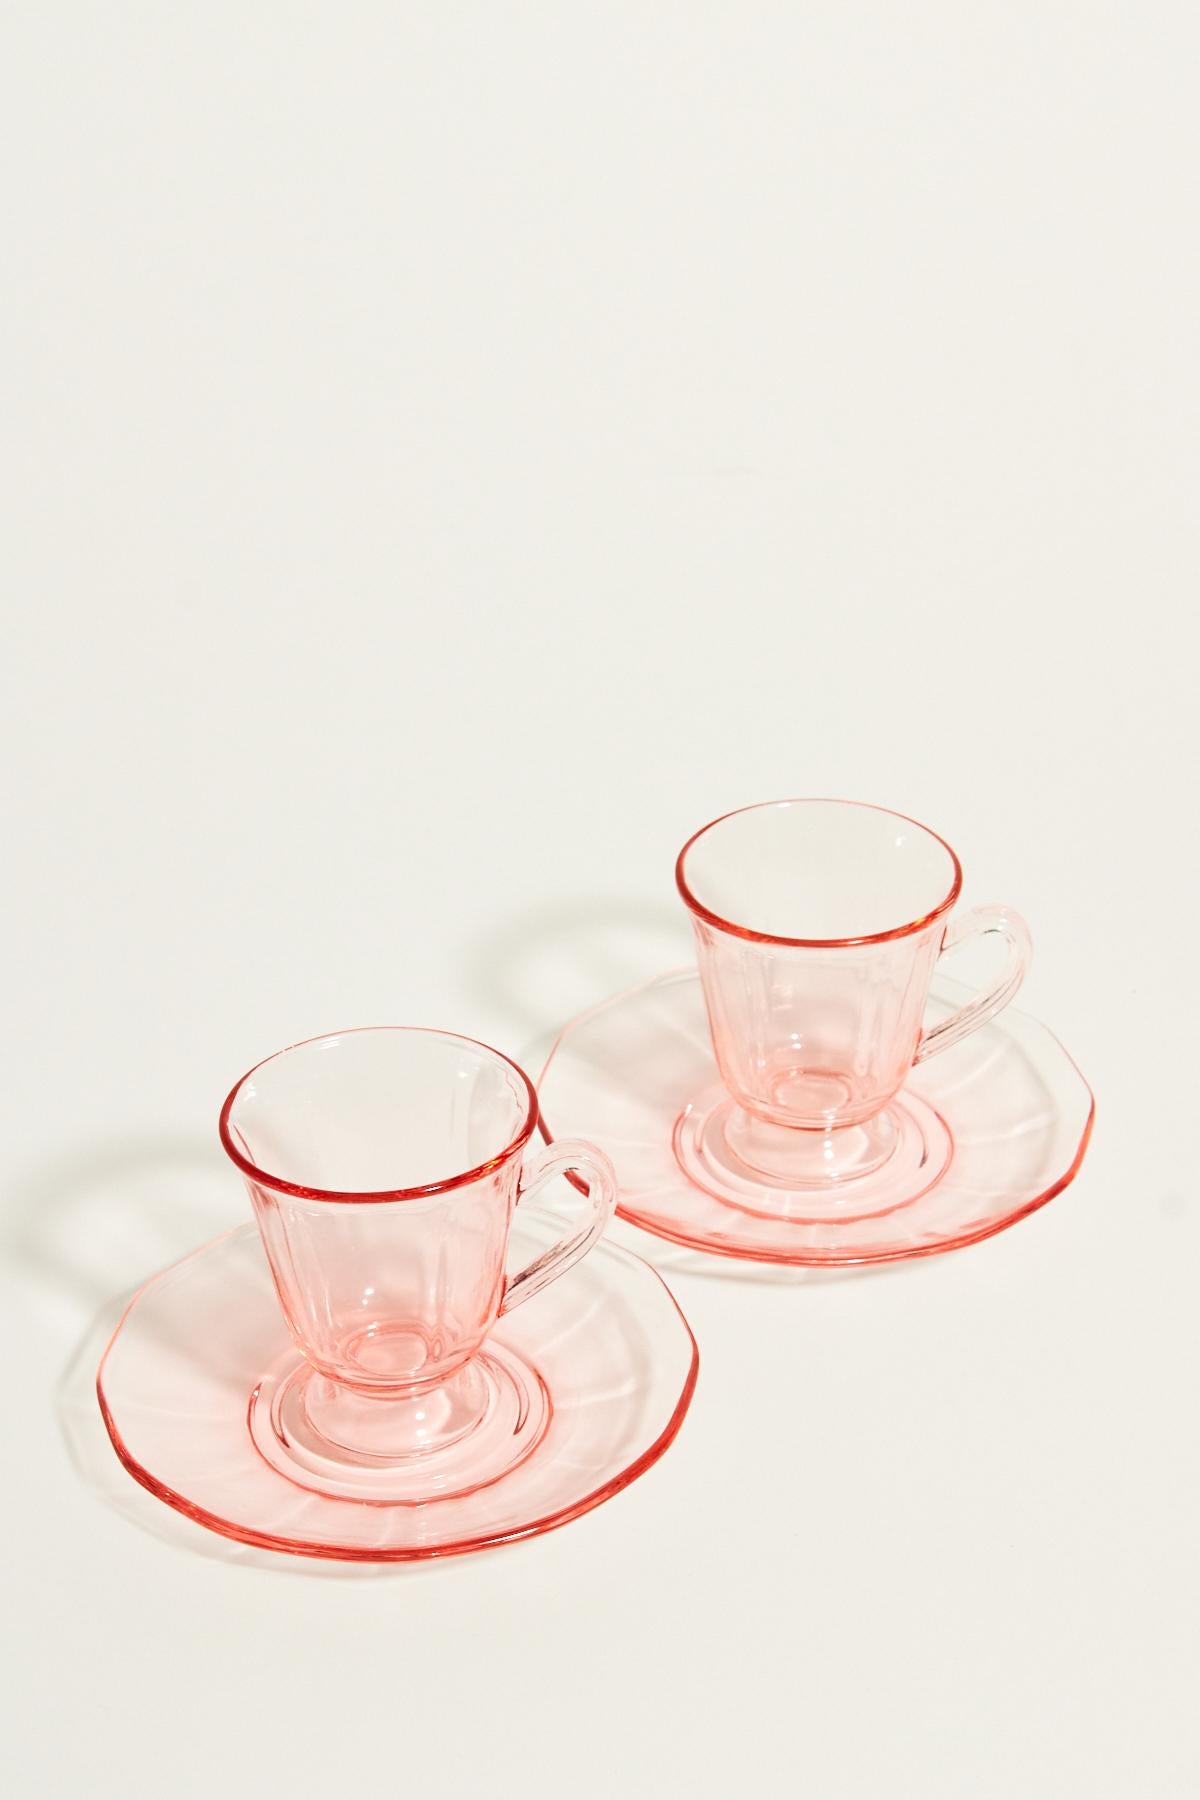 Sweet demitasse set of two in fluted pink glass with pedestal cups.